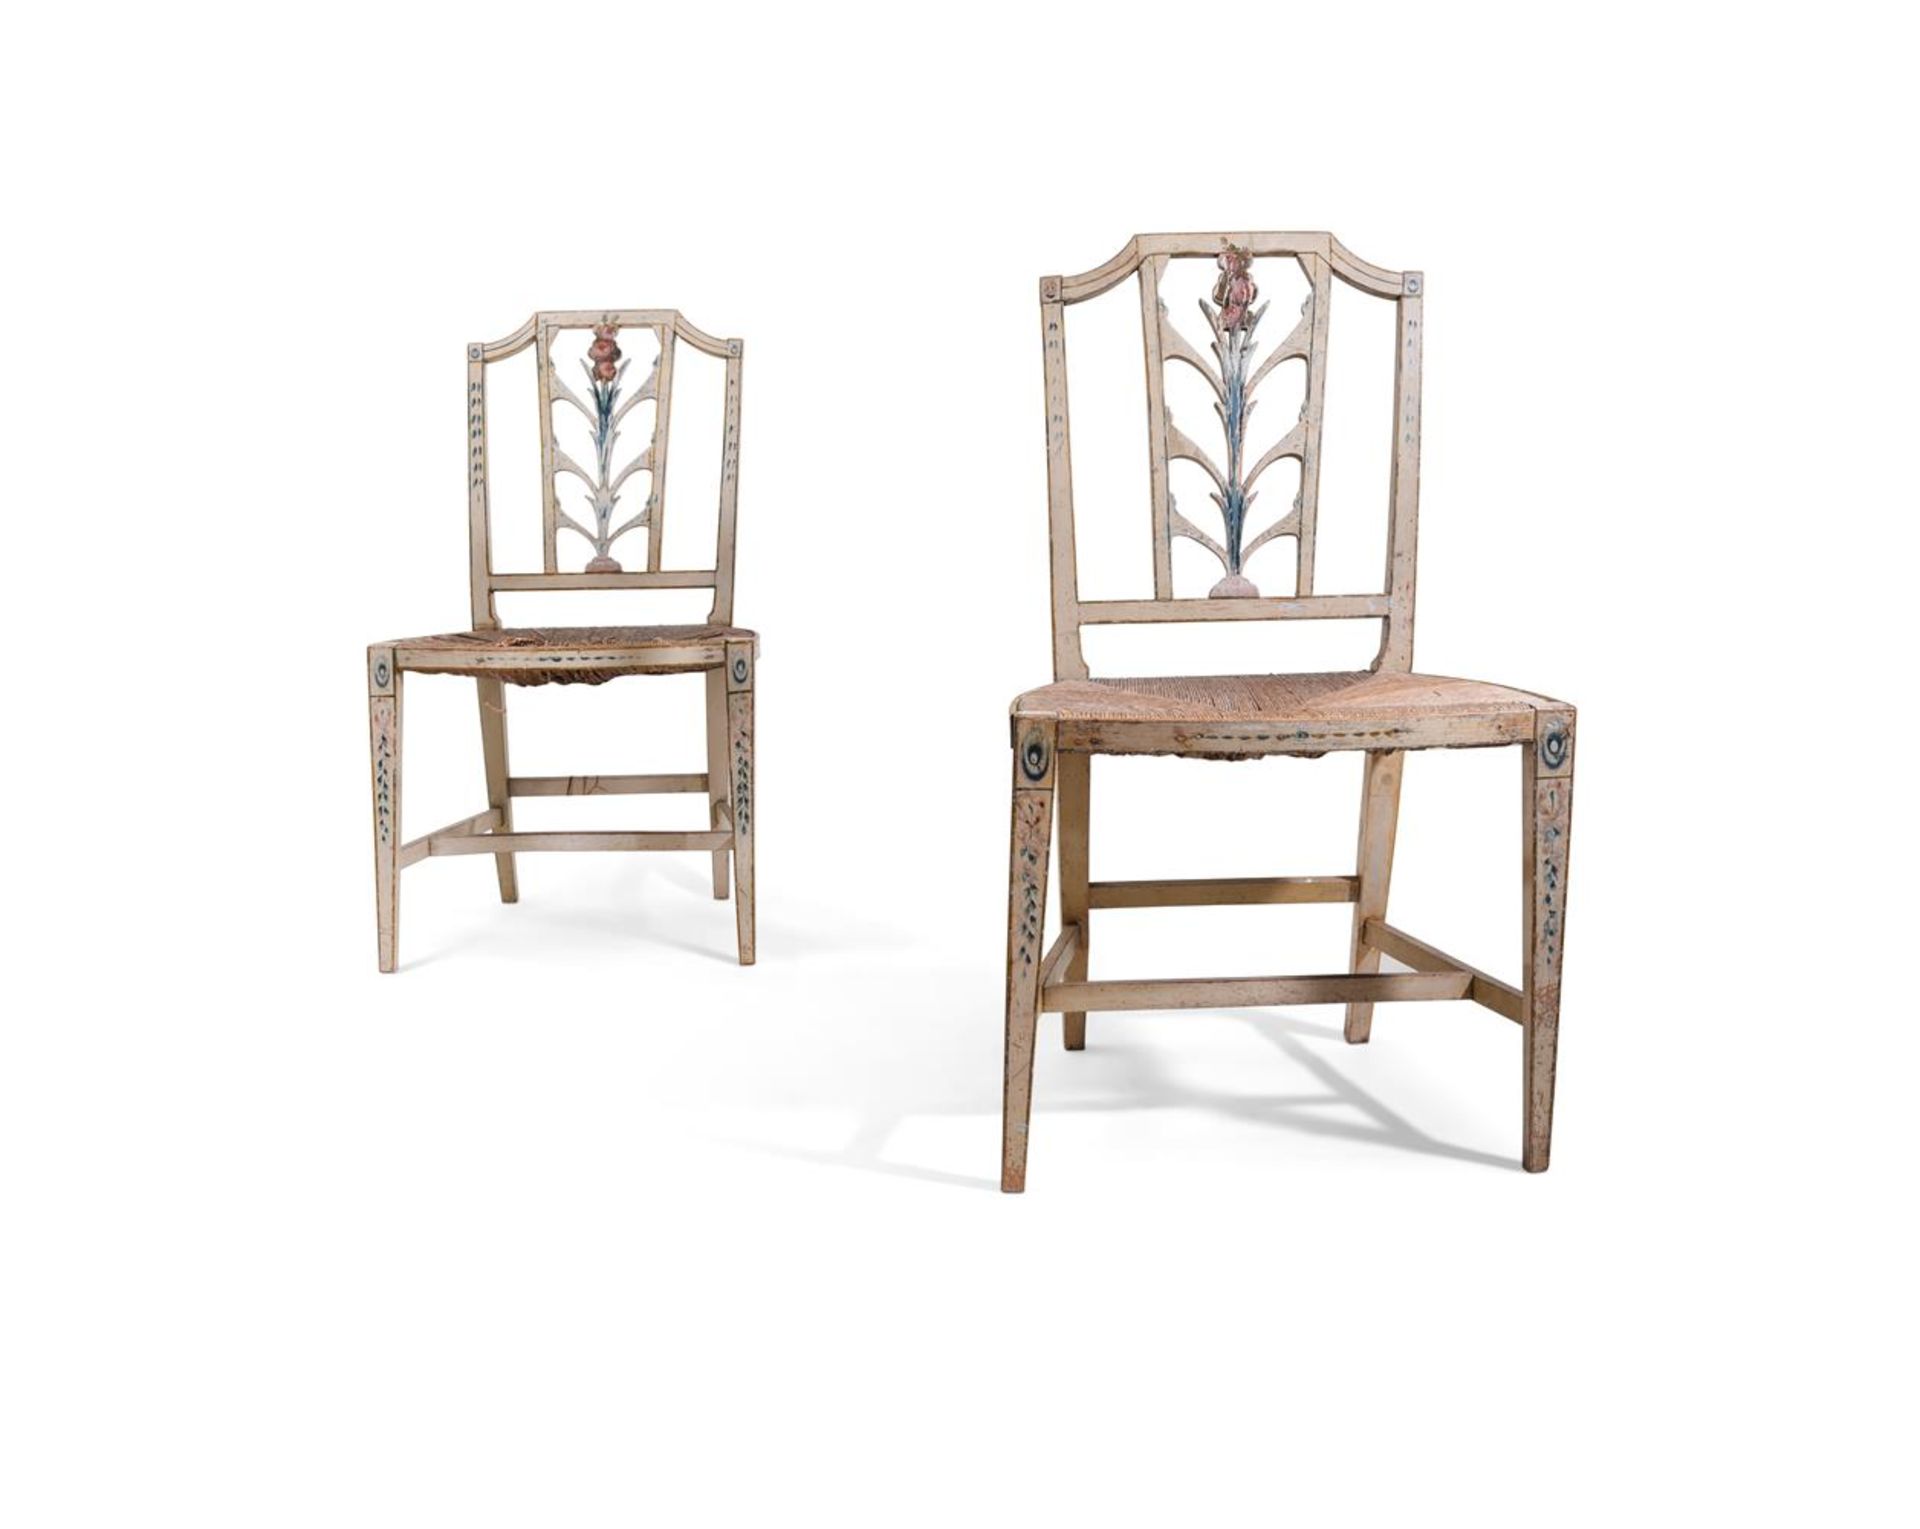 A PAIR OF GEORGE III CREAM AND POLYCHROME PAINTED SIDE CHAIRS, ATTRIBUTED TO GILLOWS, CIRCA 1790